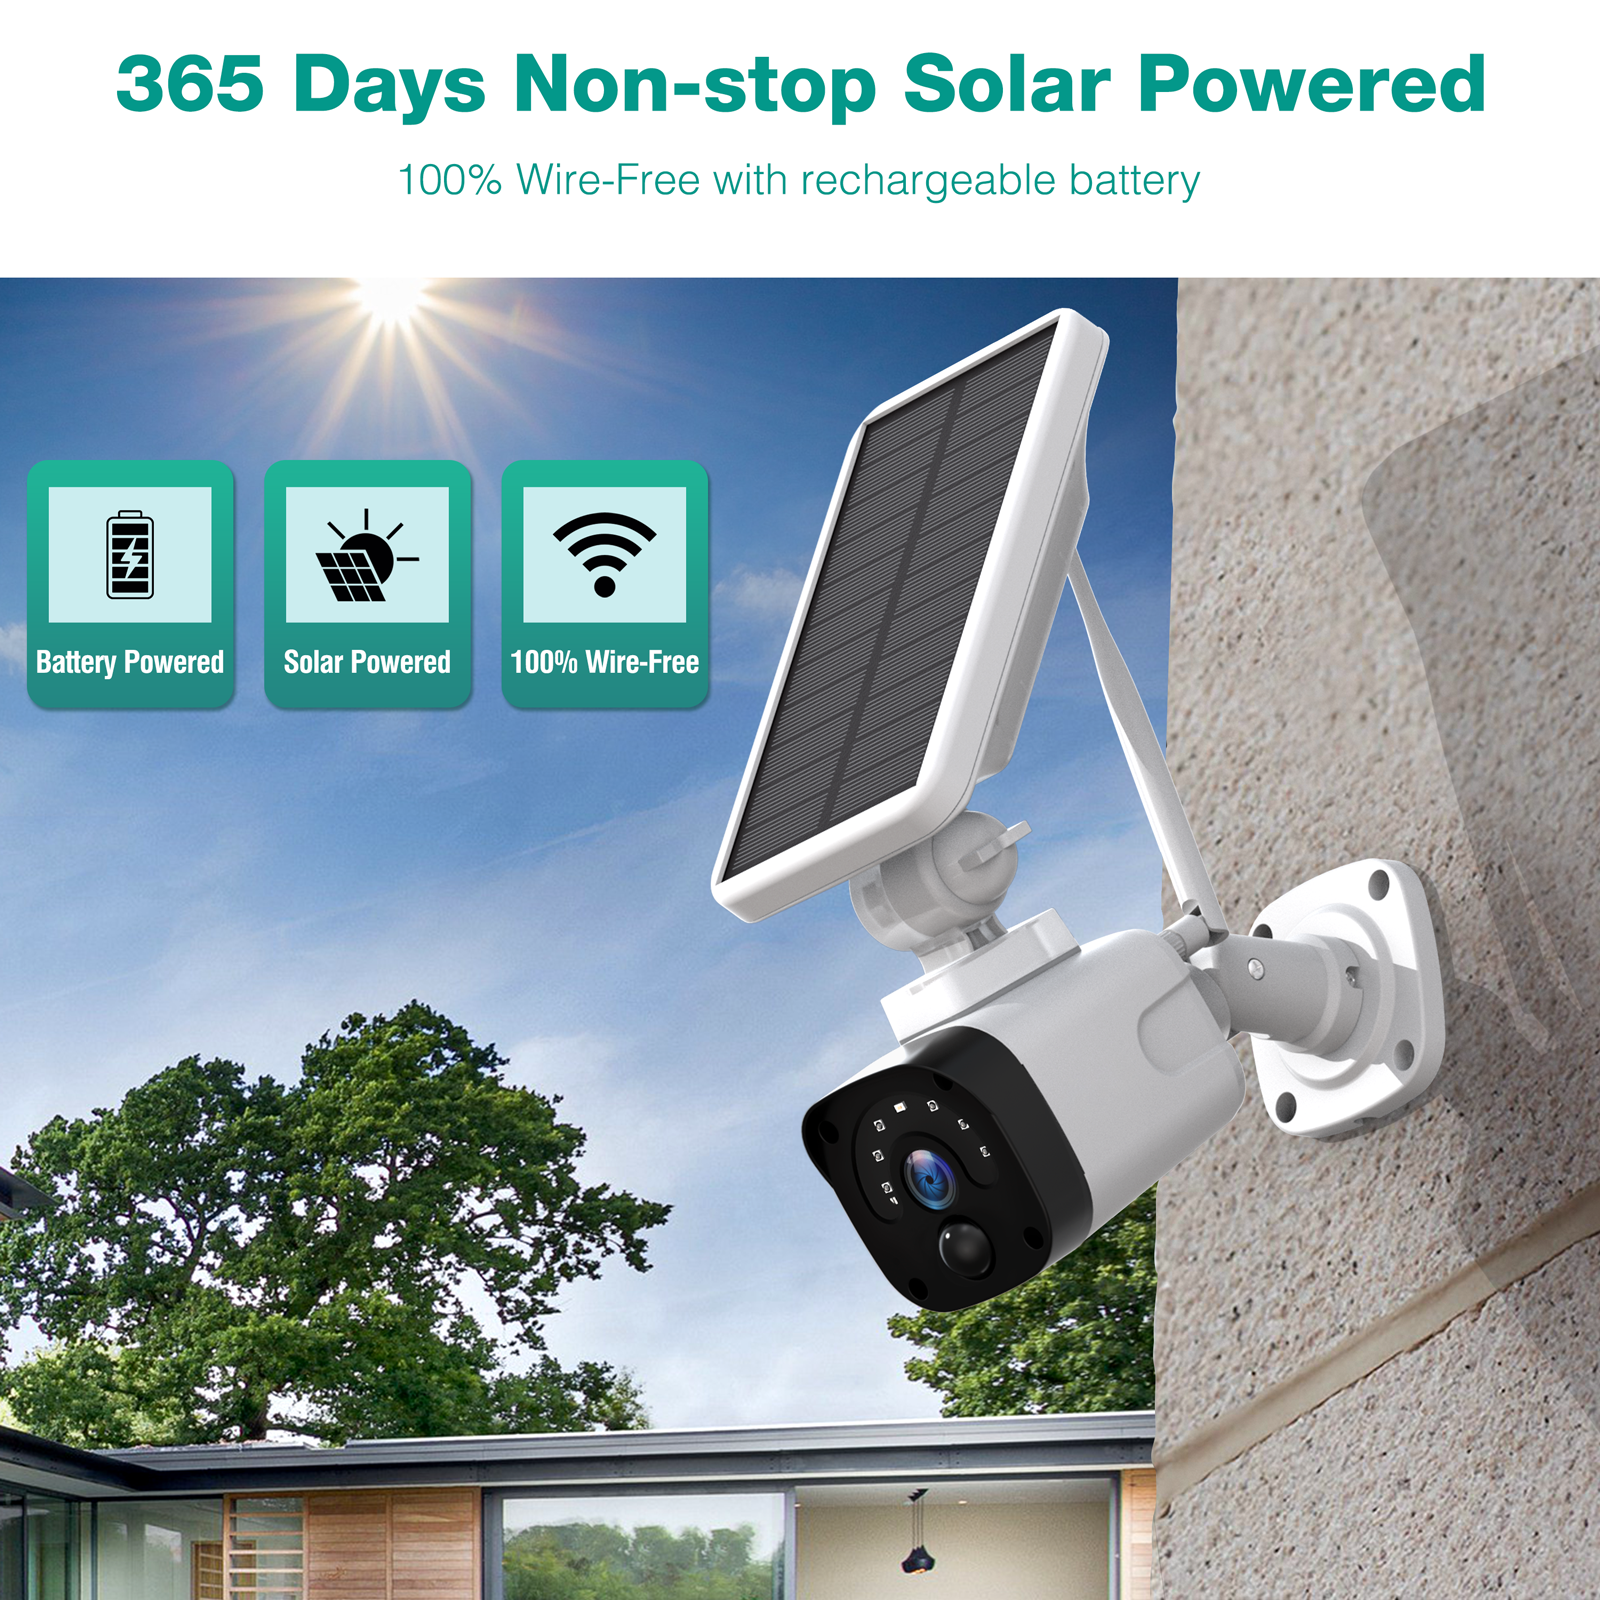 TOGUARD 3MP Solar Wireless Security Camera System Outdoor with Base Station, CCTV Camera Security System 2-Way Audio PIR Motion Detection Night Vision Support TF/Cloud Storage HDMI Output - image 3 of 9